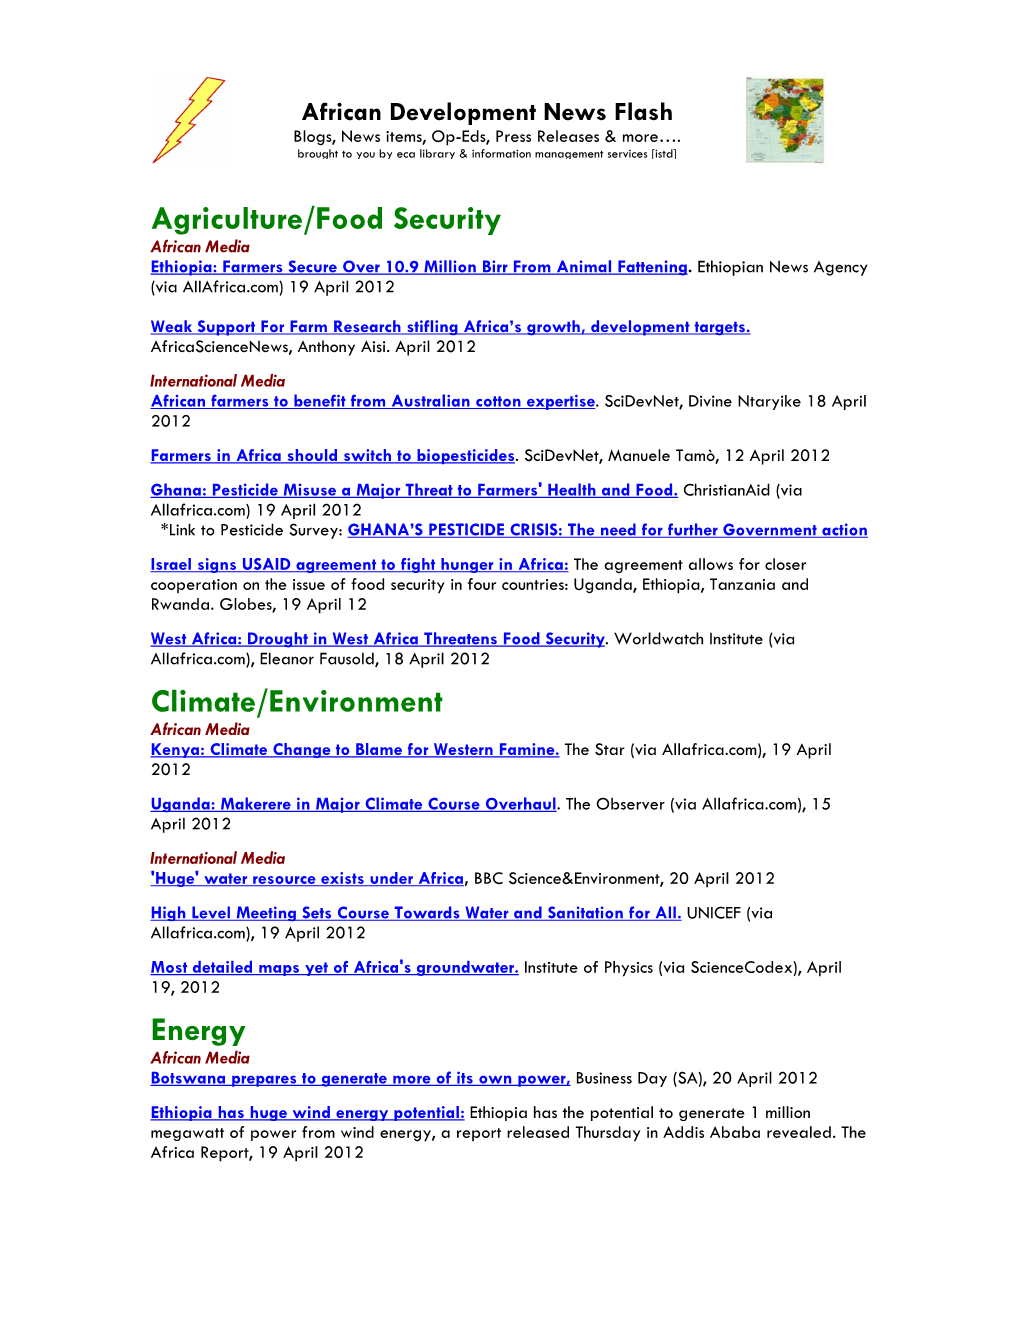 Agriculture/Food Security Climate/Environment Energy